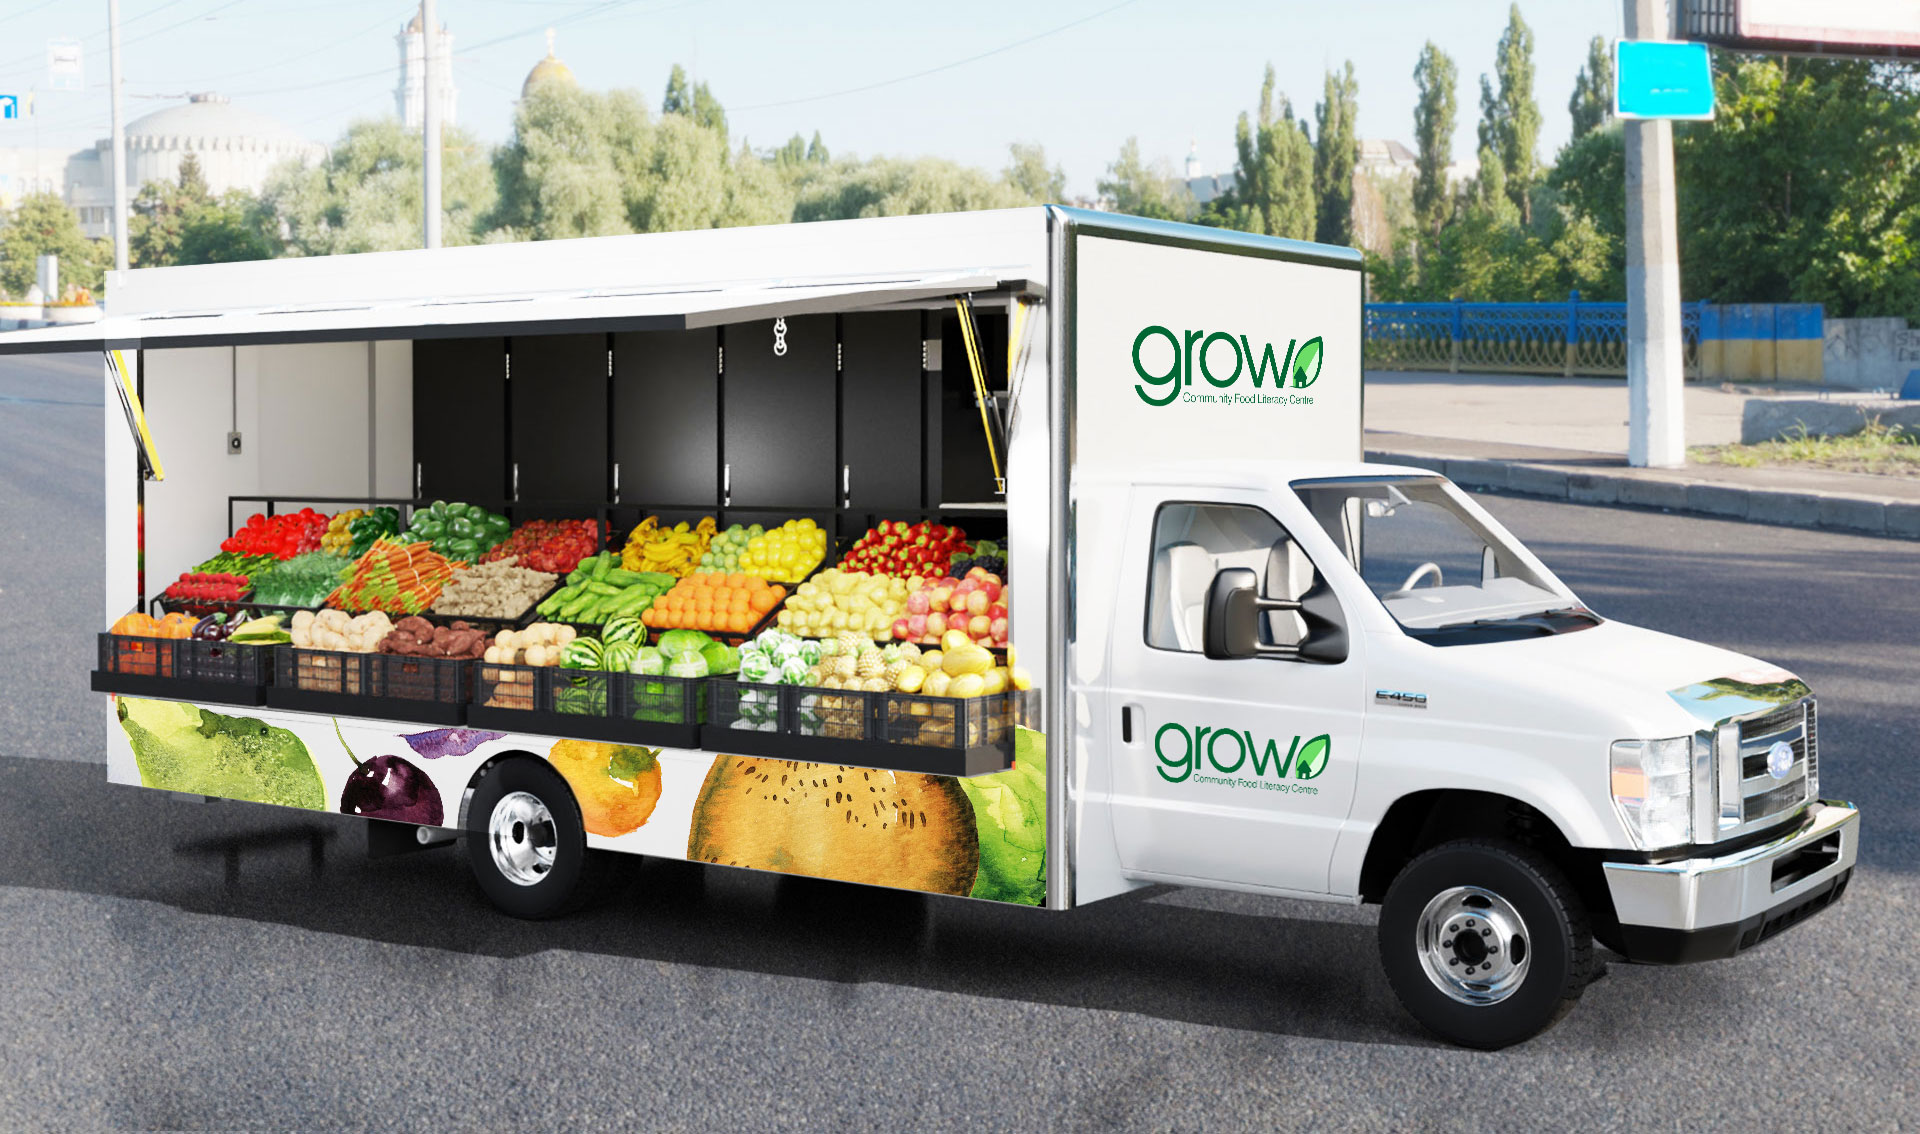 An artist mock-up of a refrigerated truck with the Grow logo on it, stocked with fresh vegetables 